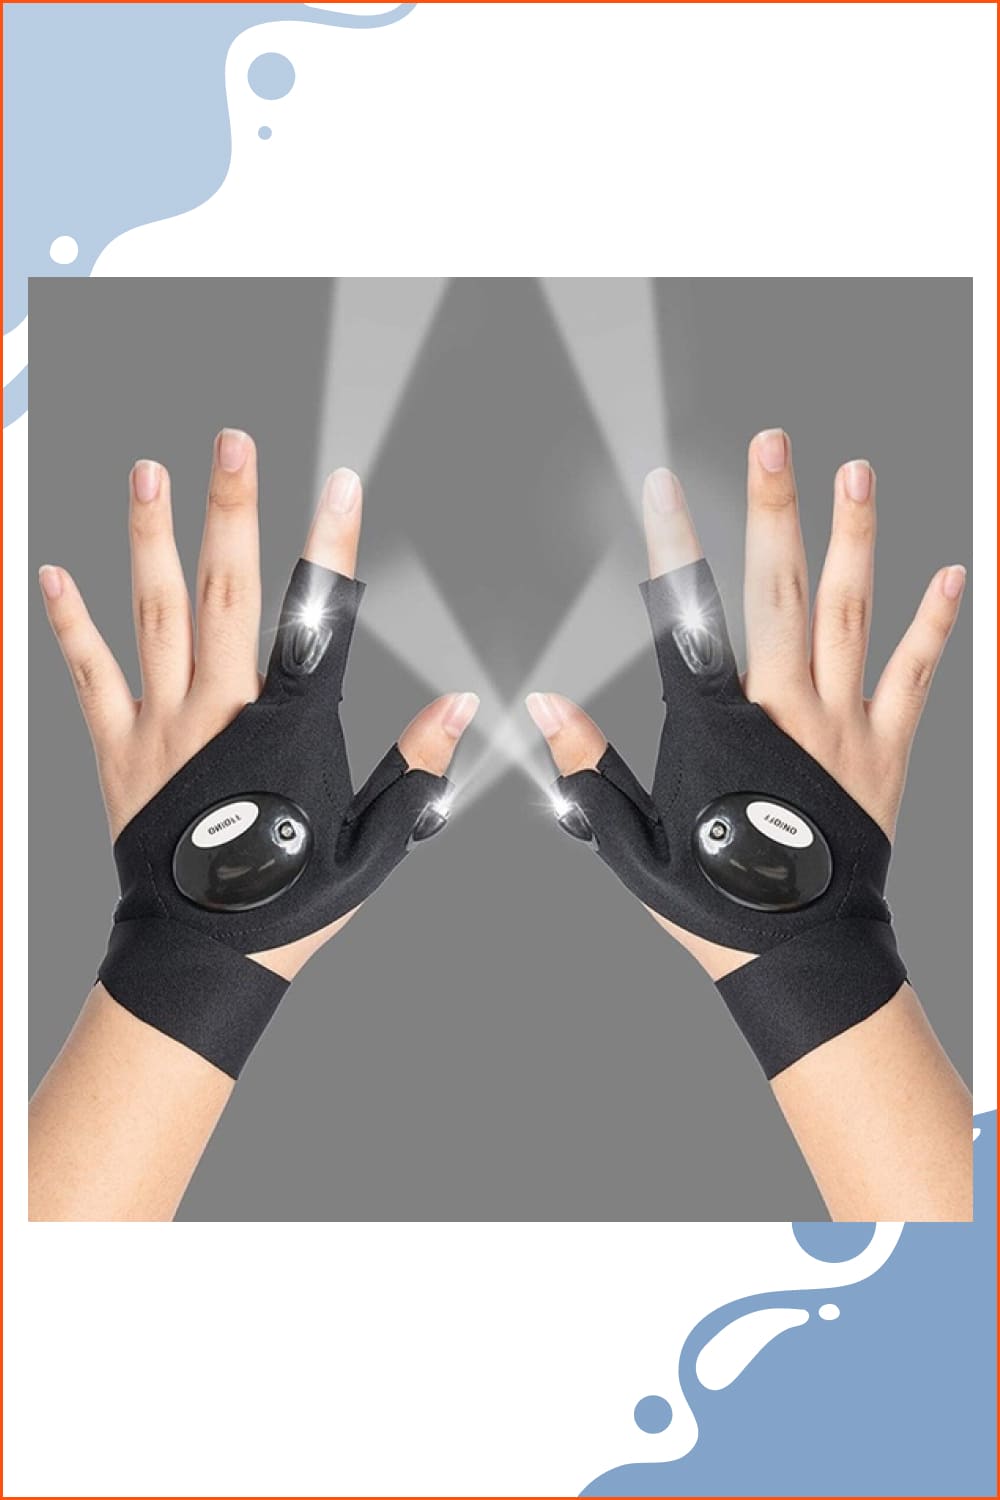 Hands in gloves with leds.